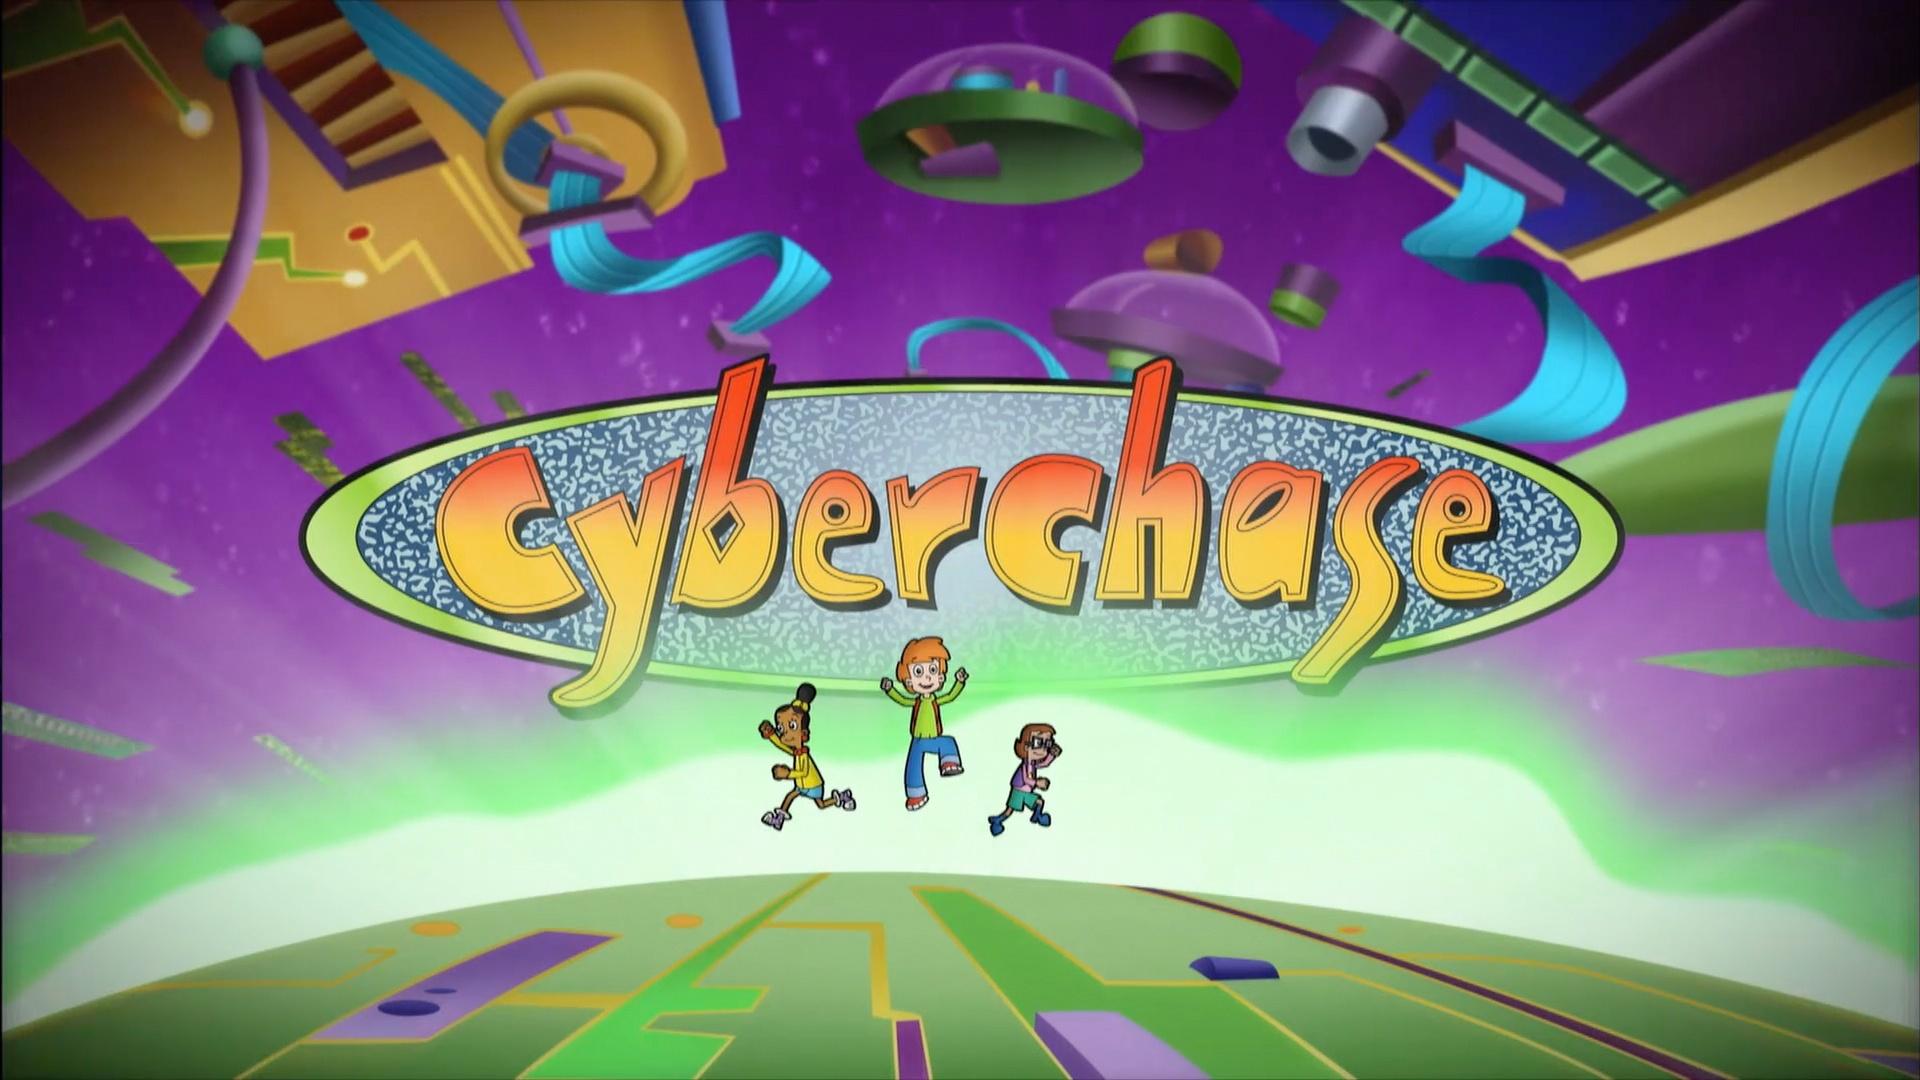 Cyberchase Episodes. PBS KIDS for Parents